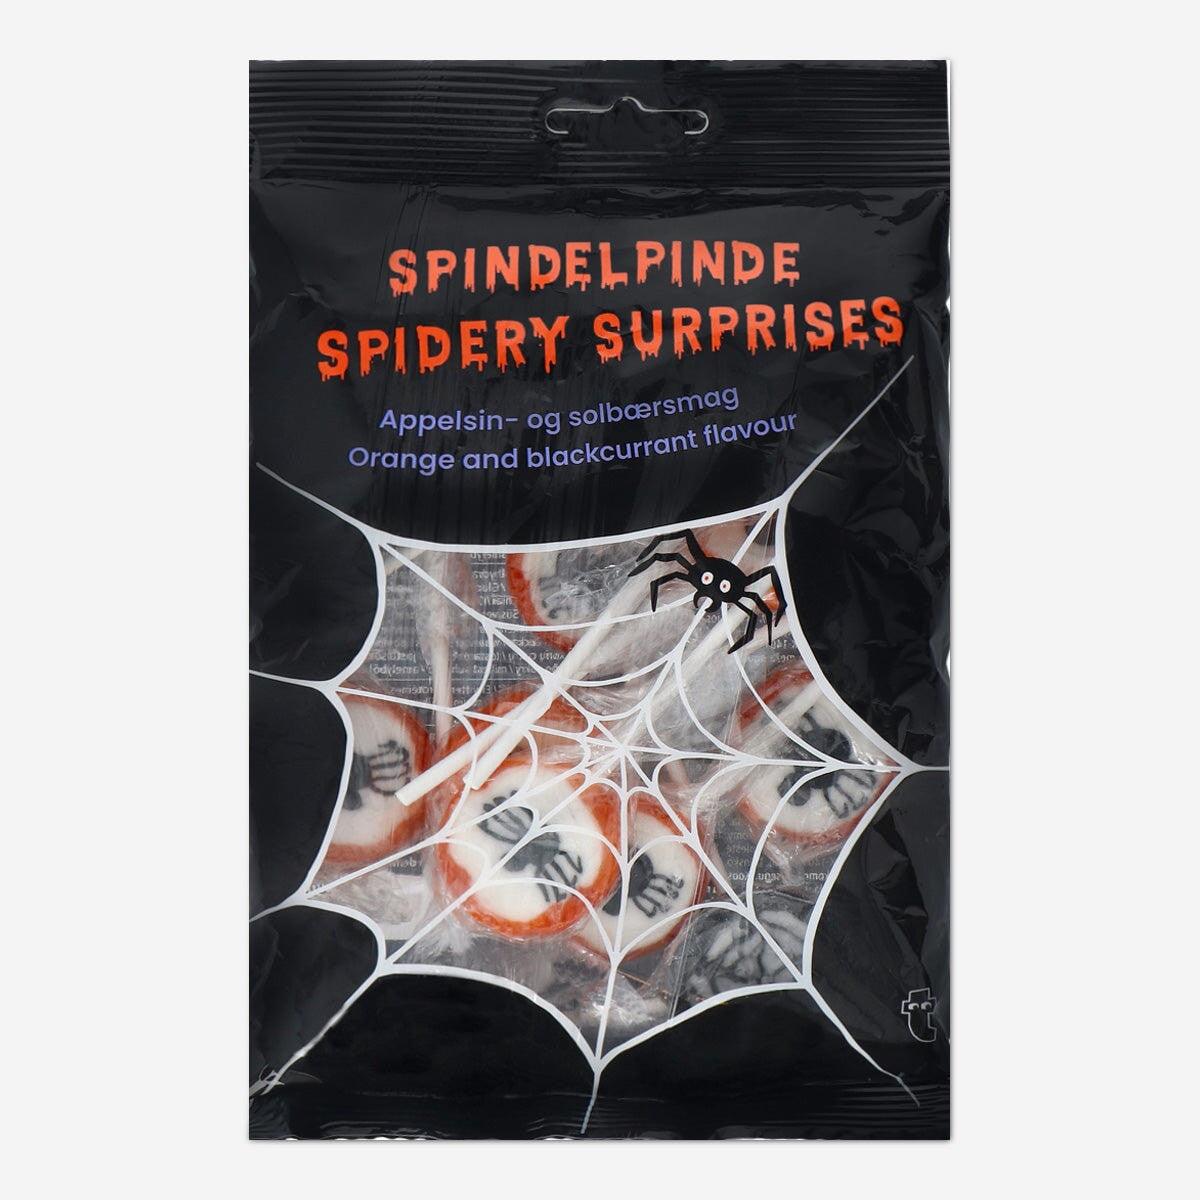 Image of Spidery surprises. Orange and blackcurrant